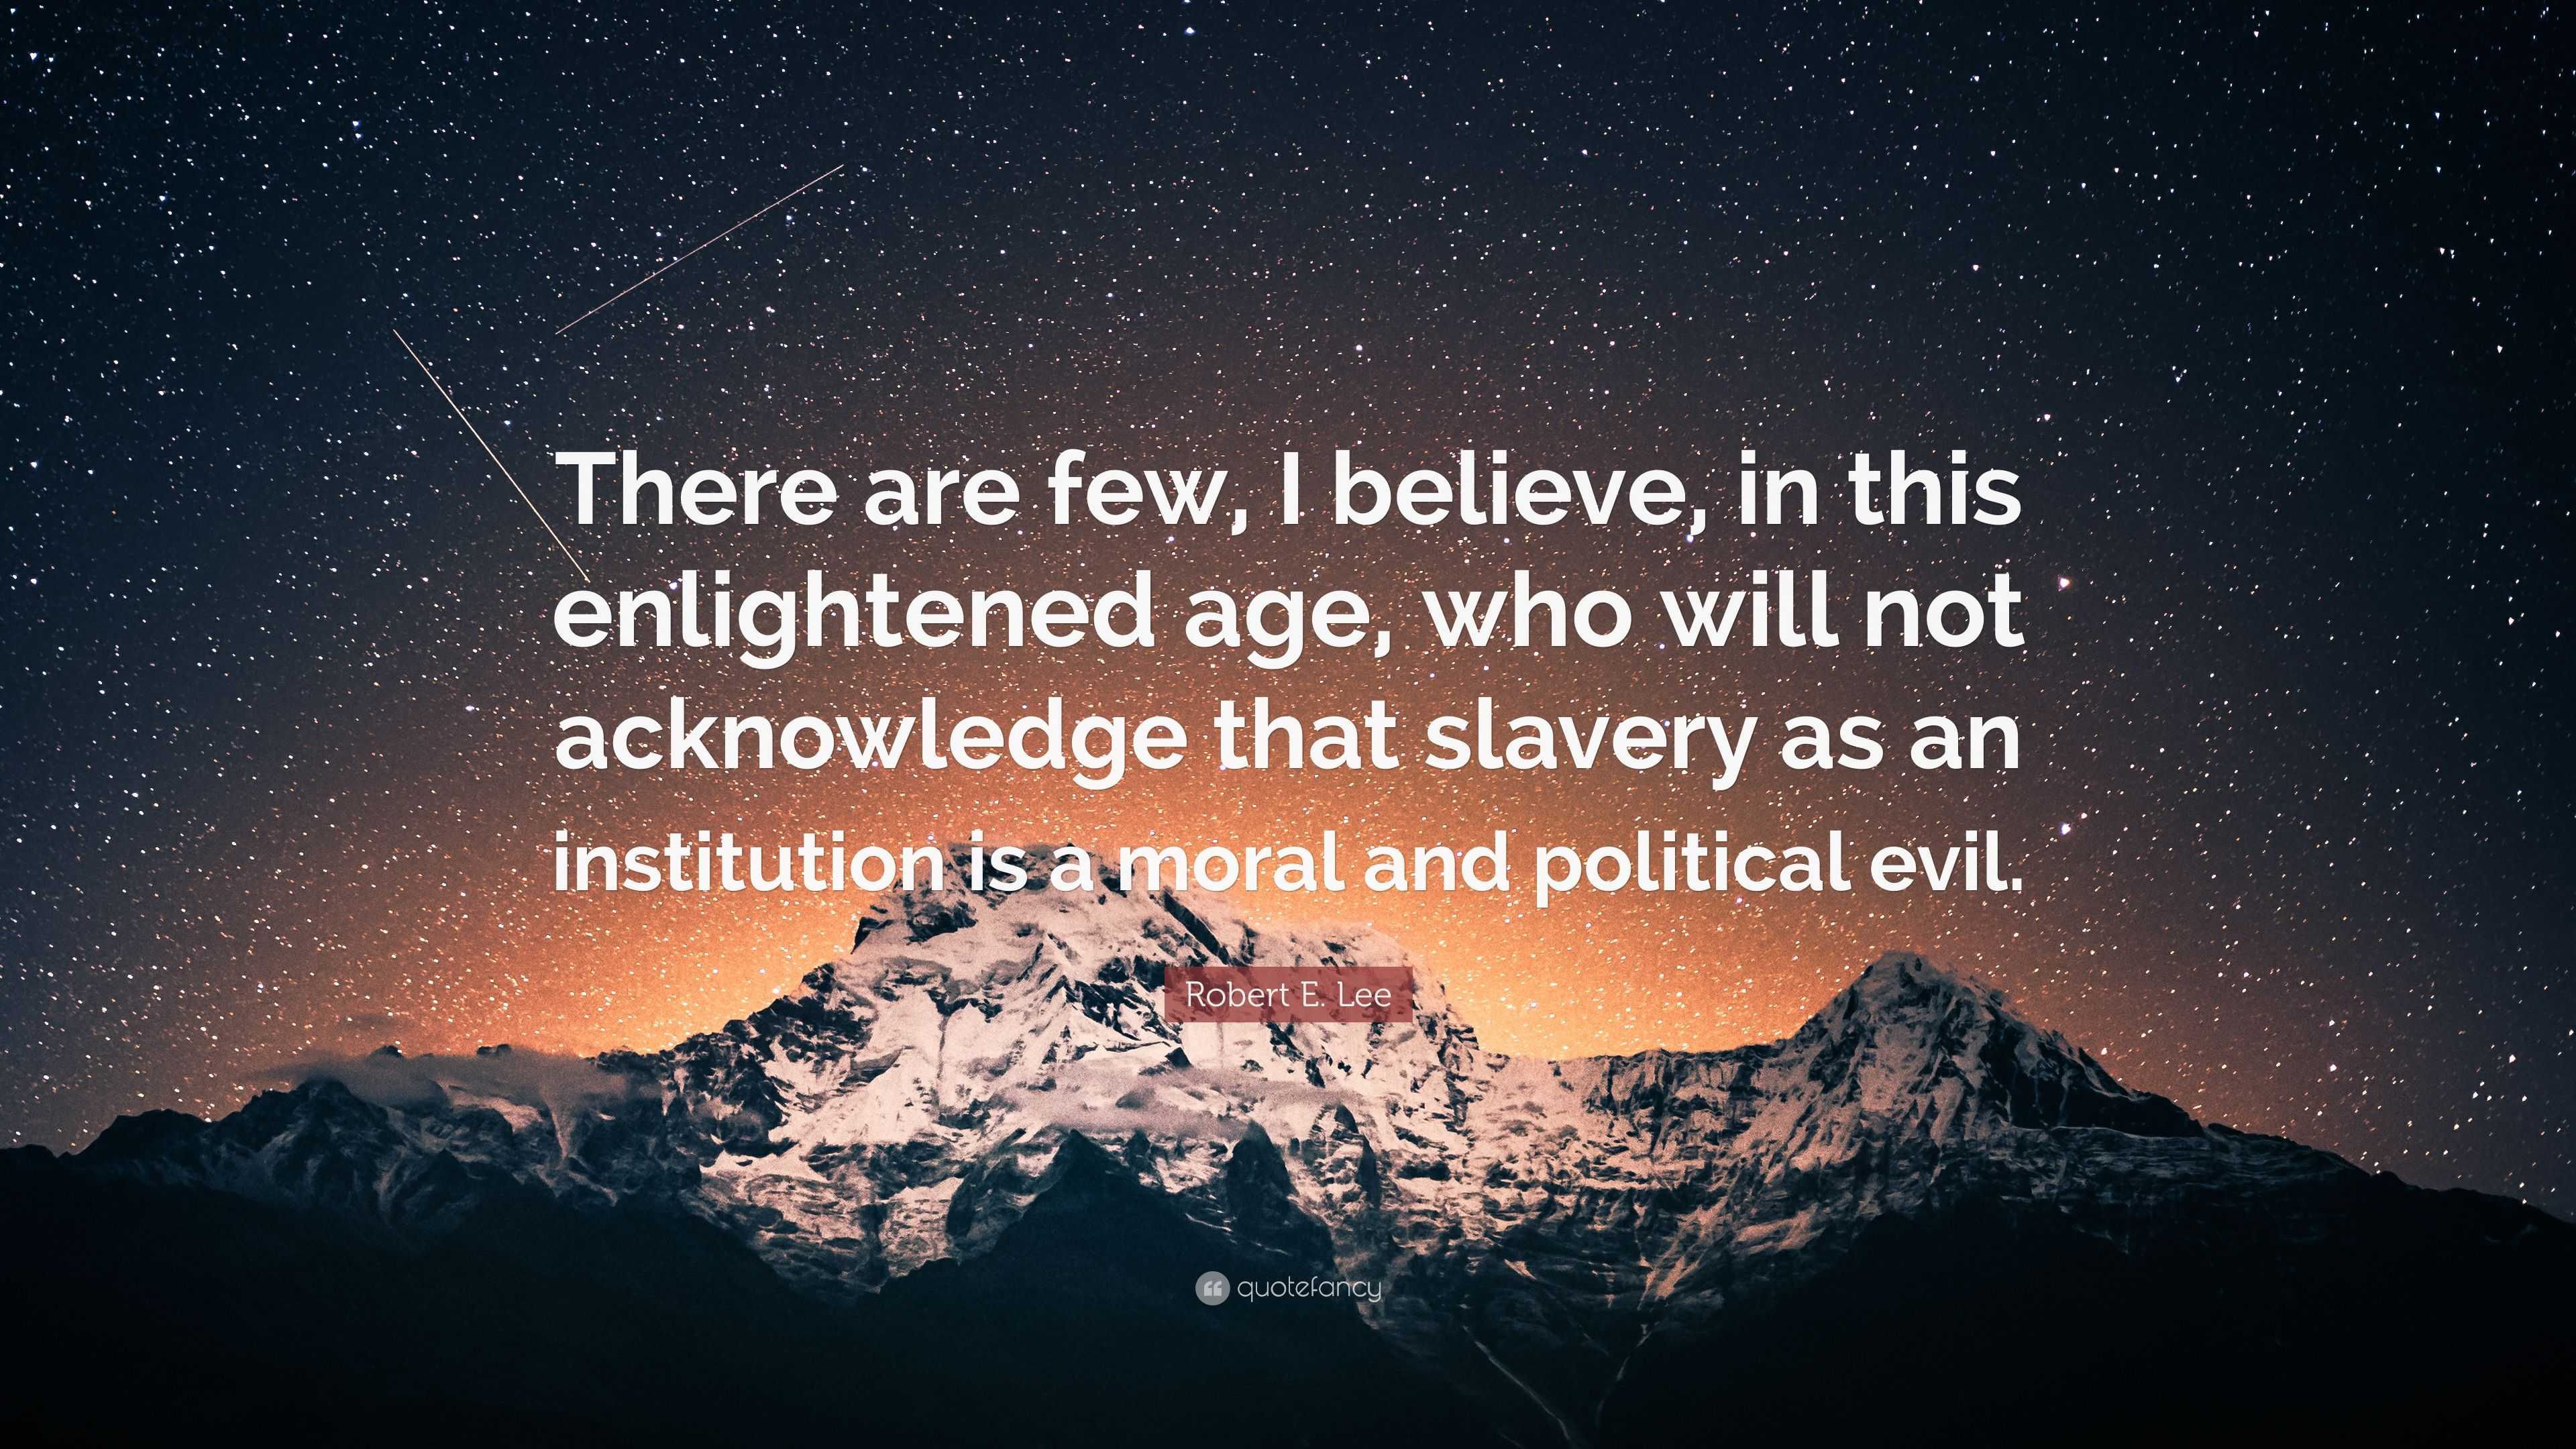 Robert E. Lee Quote: “There are few, I believe, in this enlightened age,  who will not acknowledge that slavery as an institution is a moral an...”